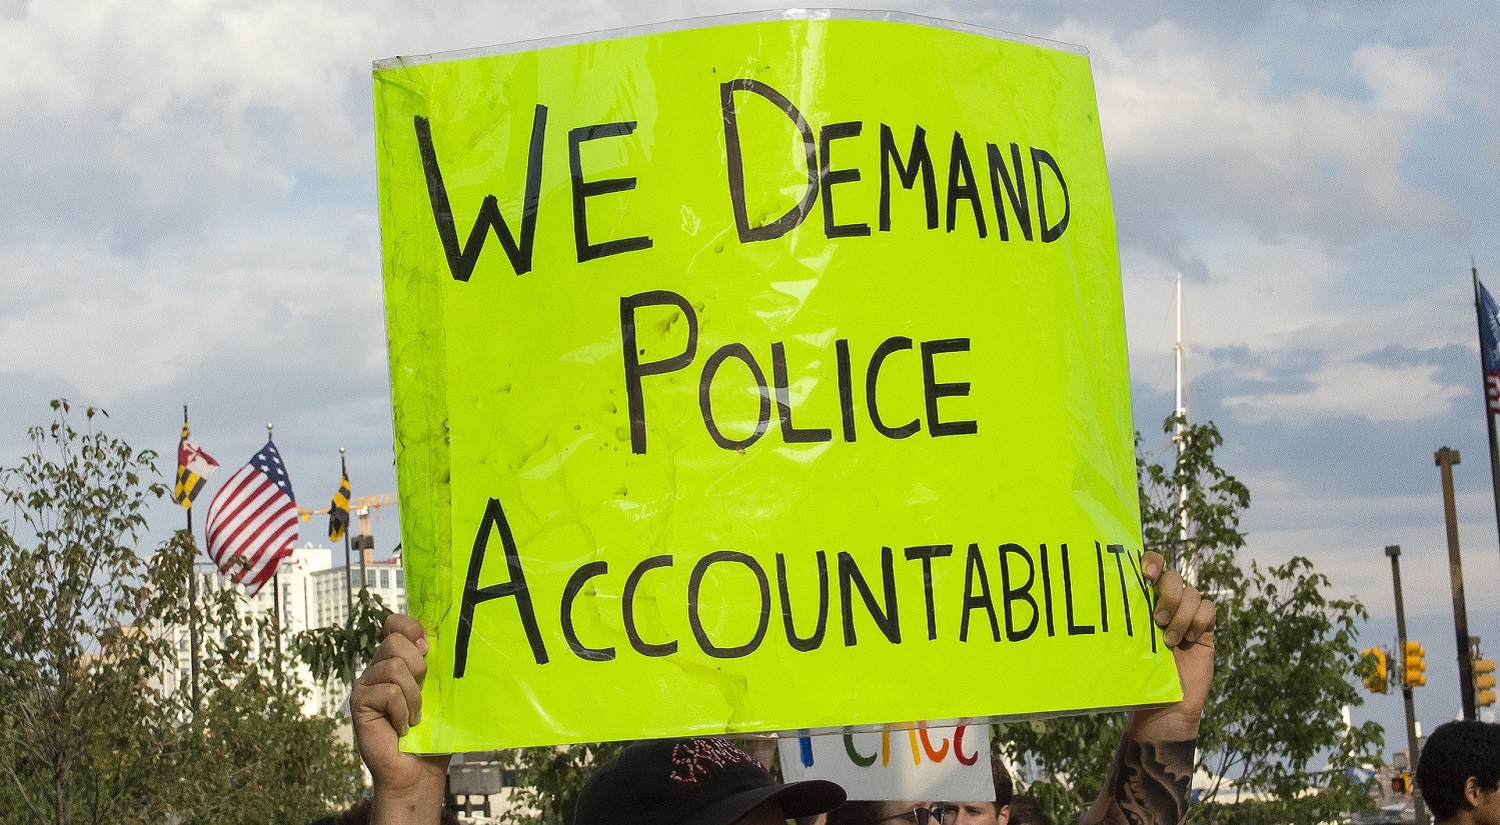 A protestor holding up a sign for police accountability on racism.